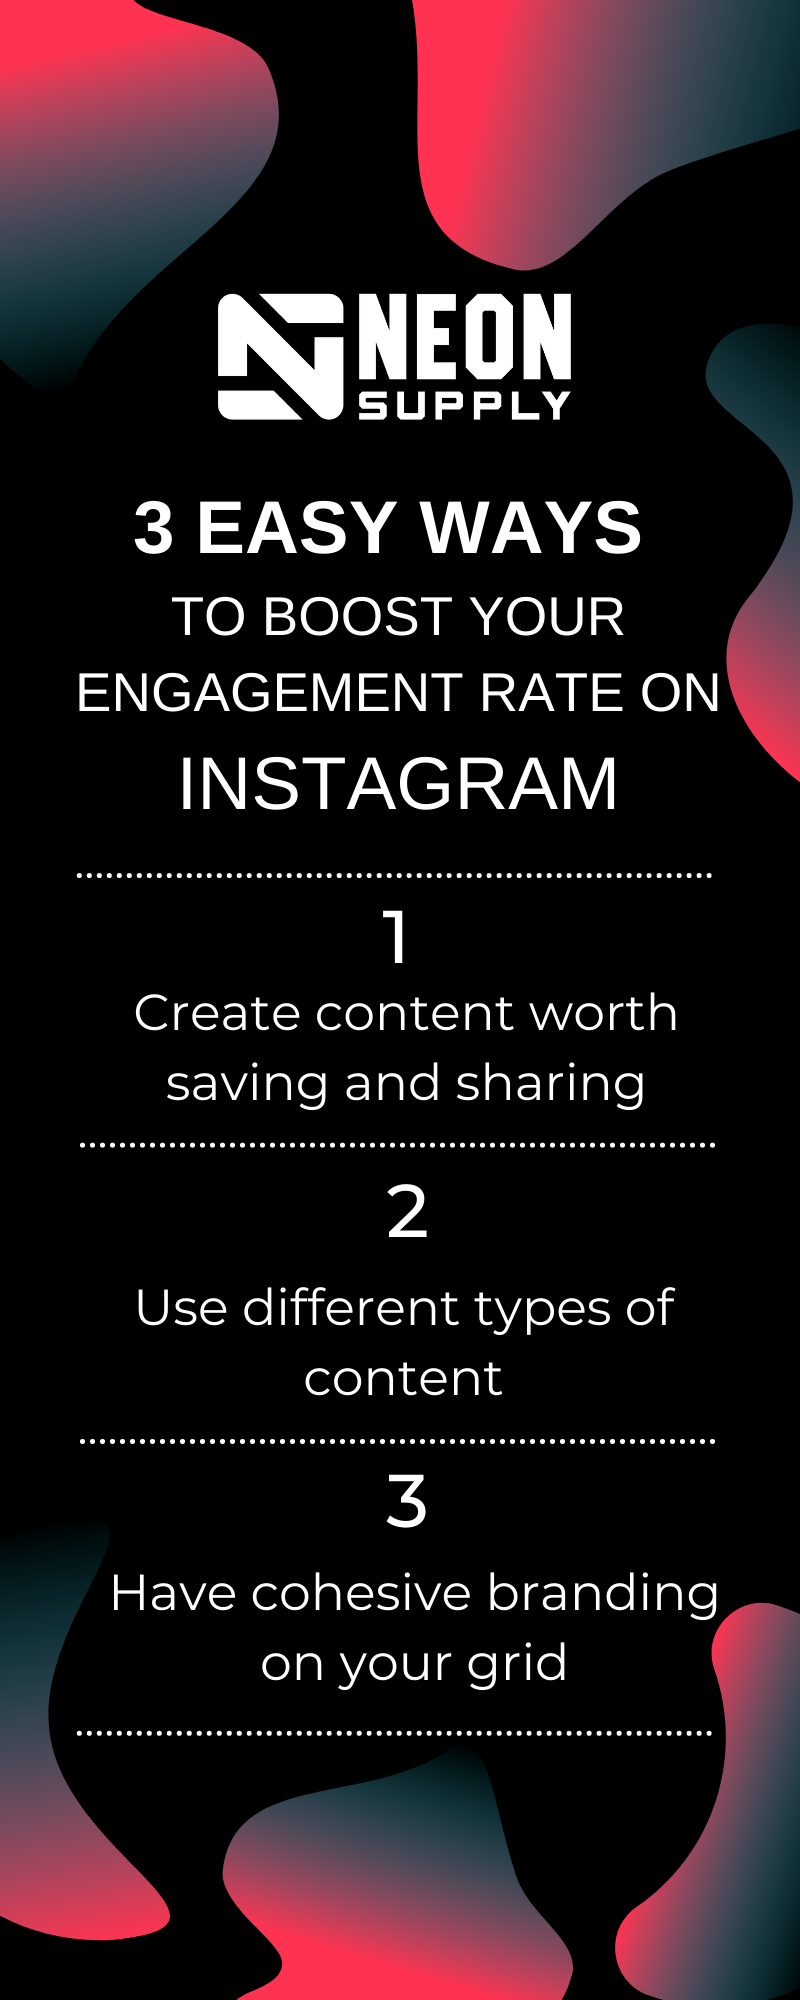 3 EASY WAYS TO BOOST YOUR ENGAGEMENT RATE ON INSTAGRAM (1)